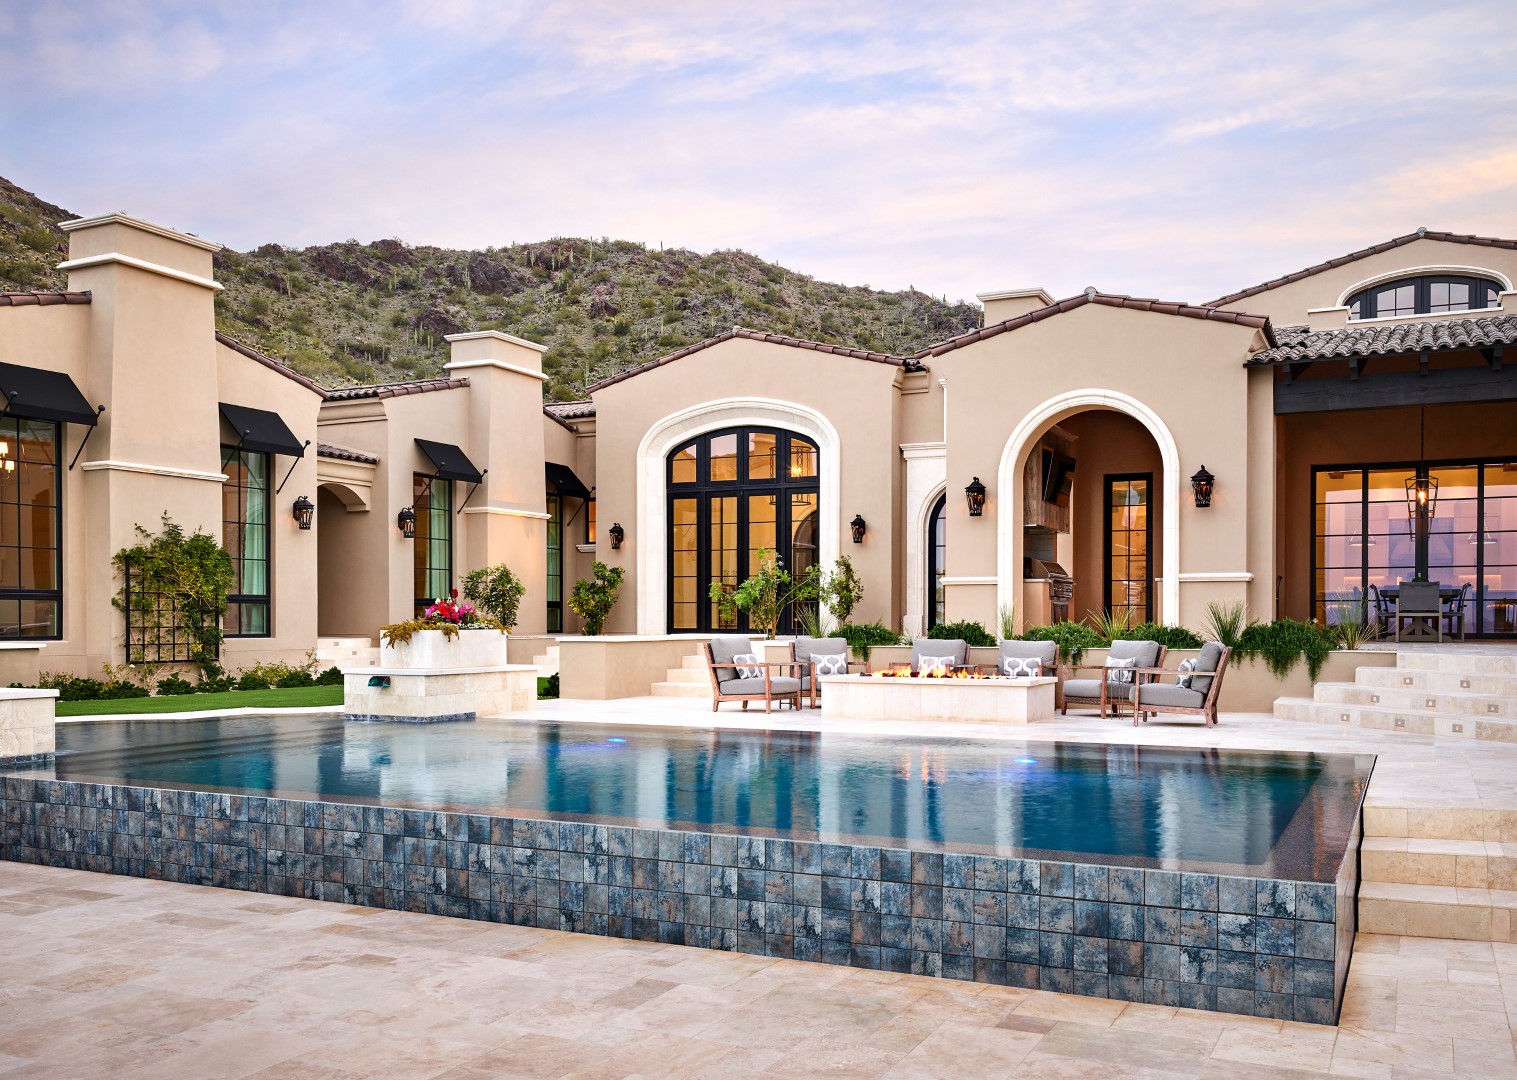 20 Mesmerizing Mediterranean Swimming Pool Designs You Will Obsess Over